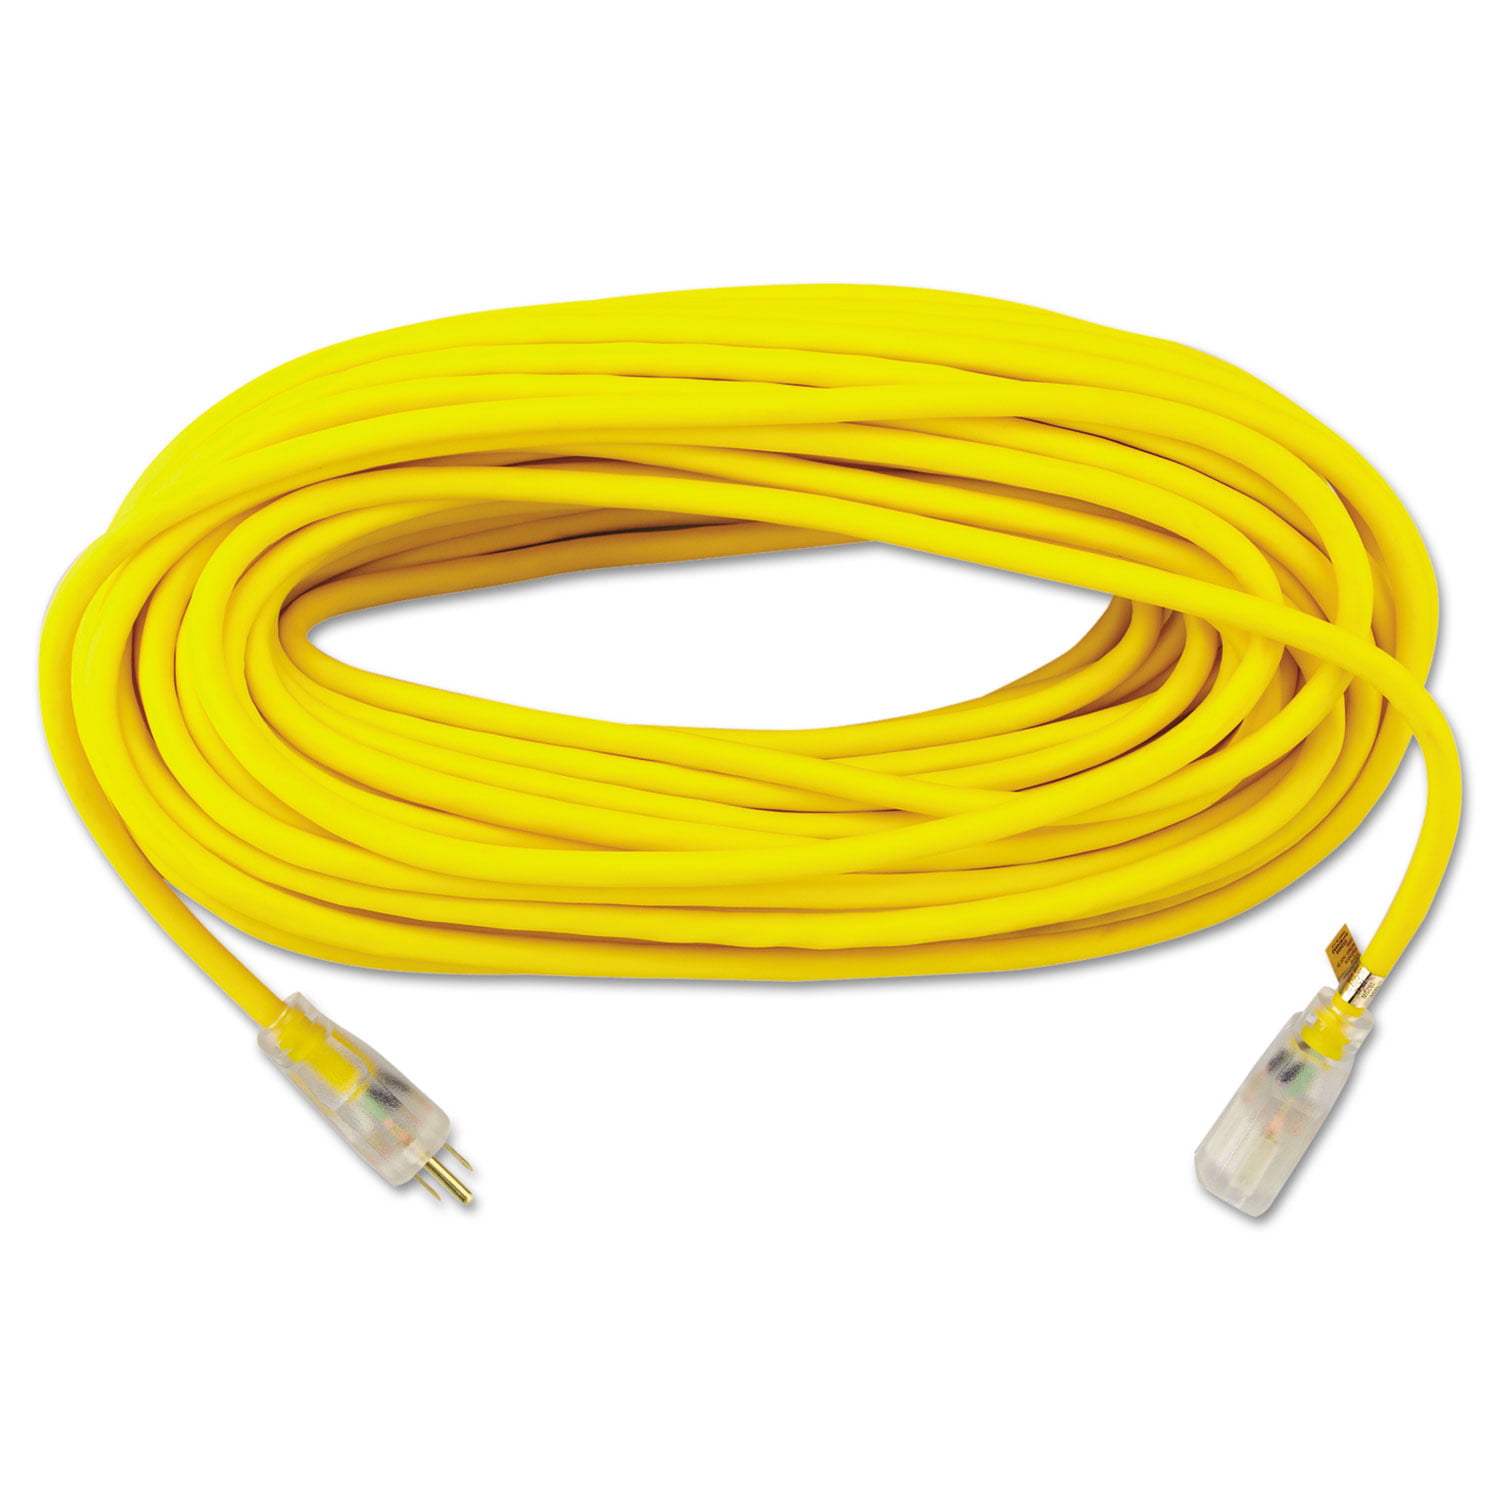 Coleman Cable Polar/solar 12 GA 100 FT Extension Cord for sale online 